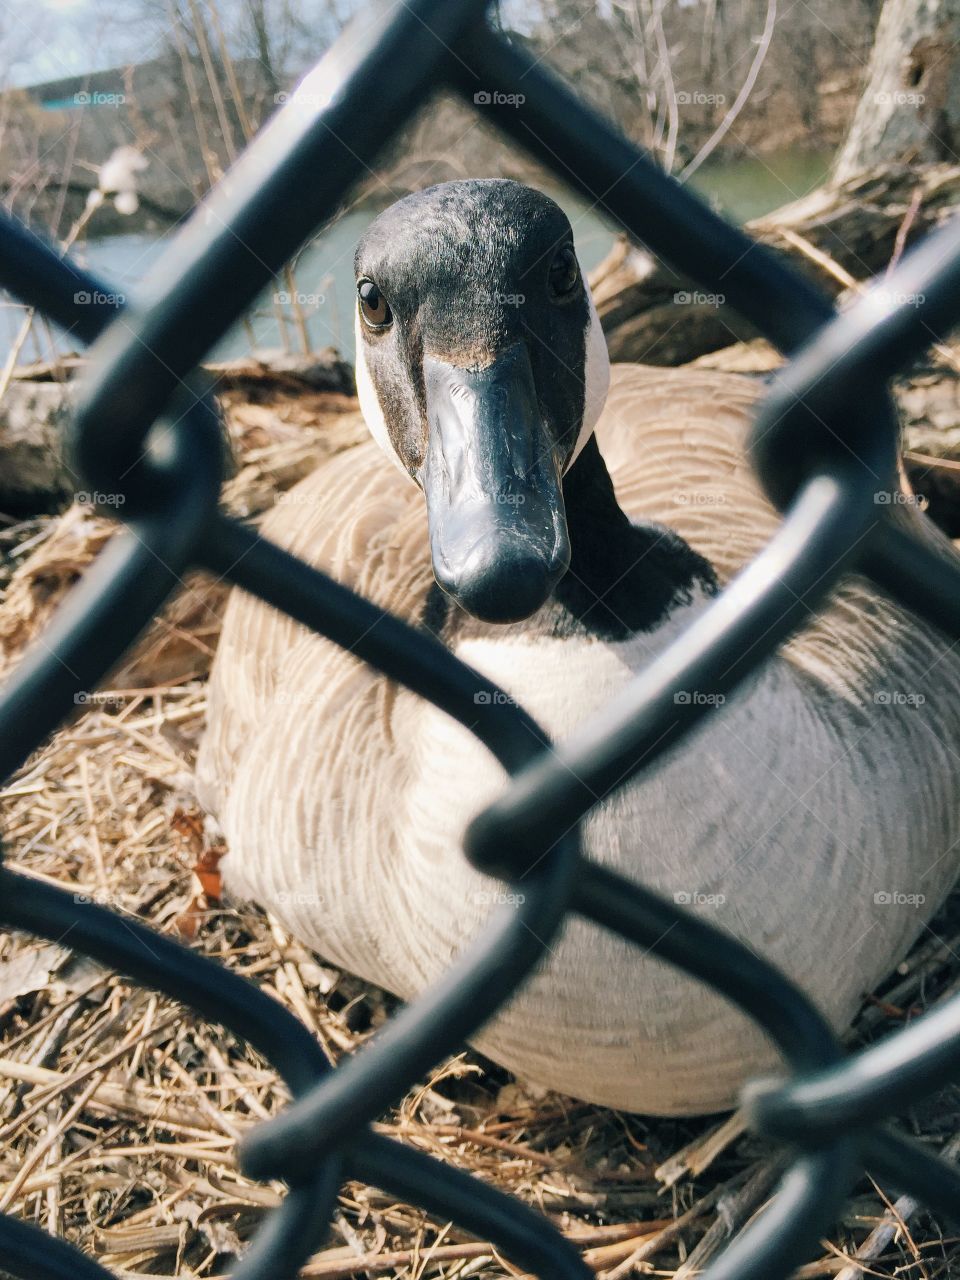 Goose sitting in nest behind fence